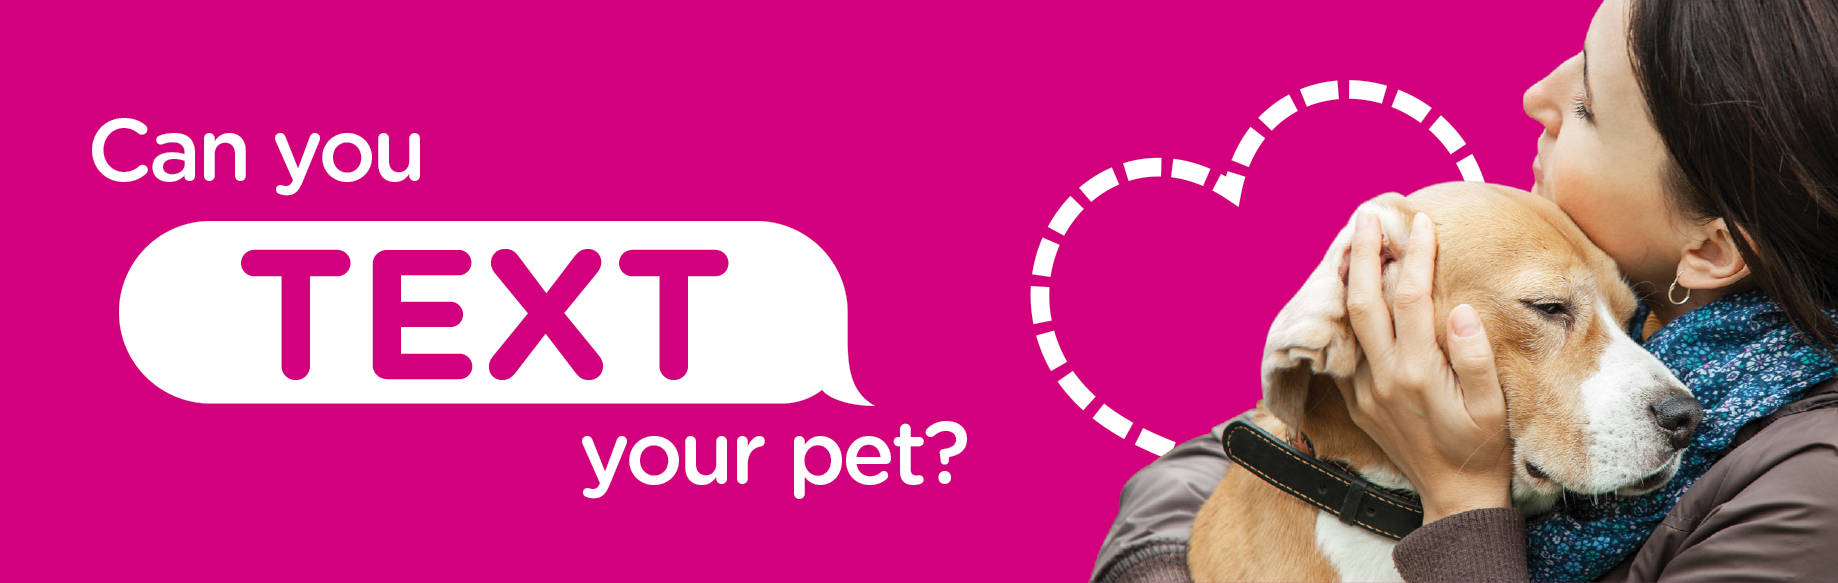 can you google your pet